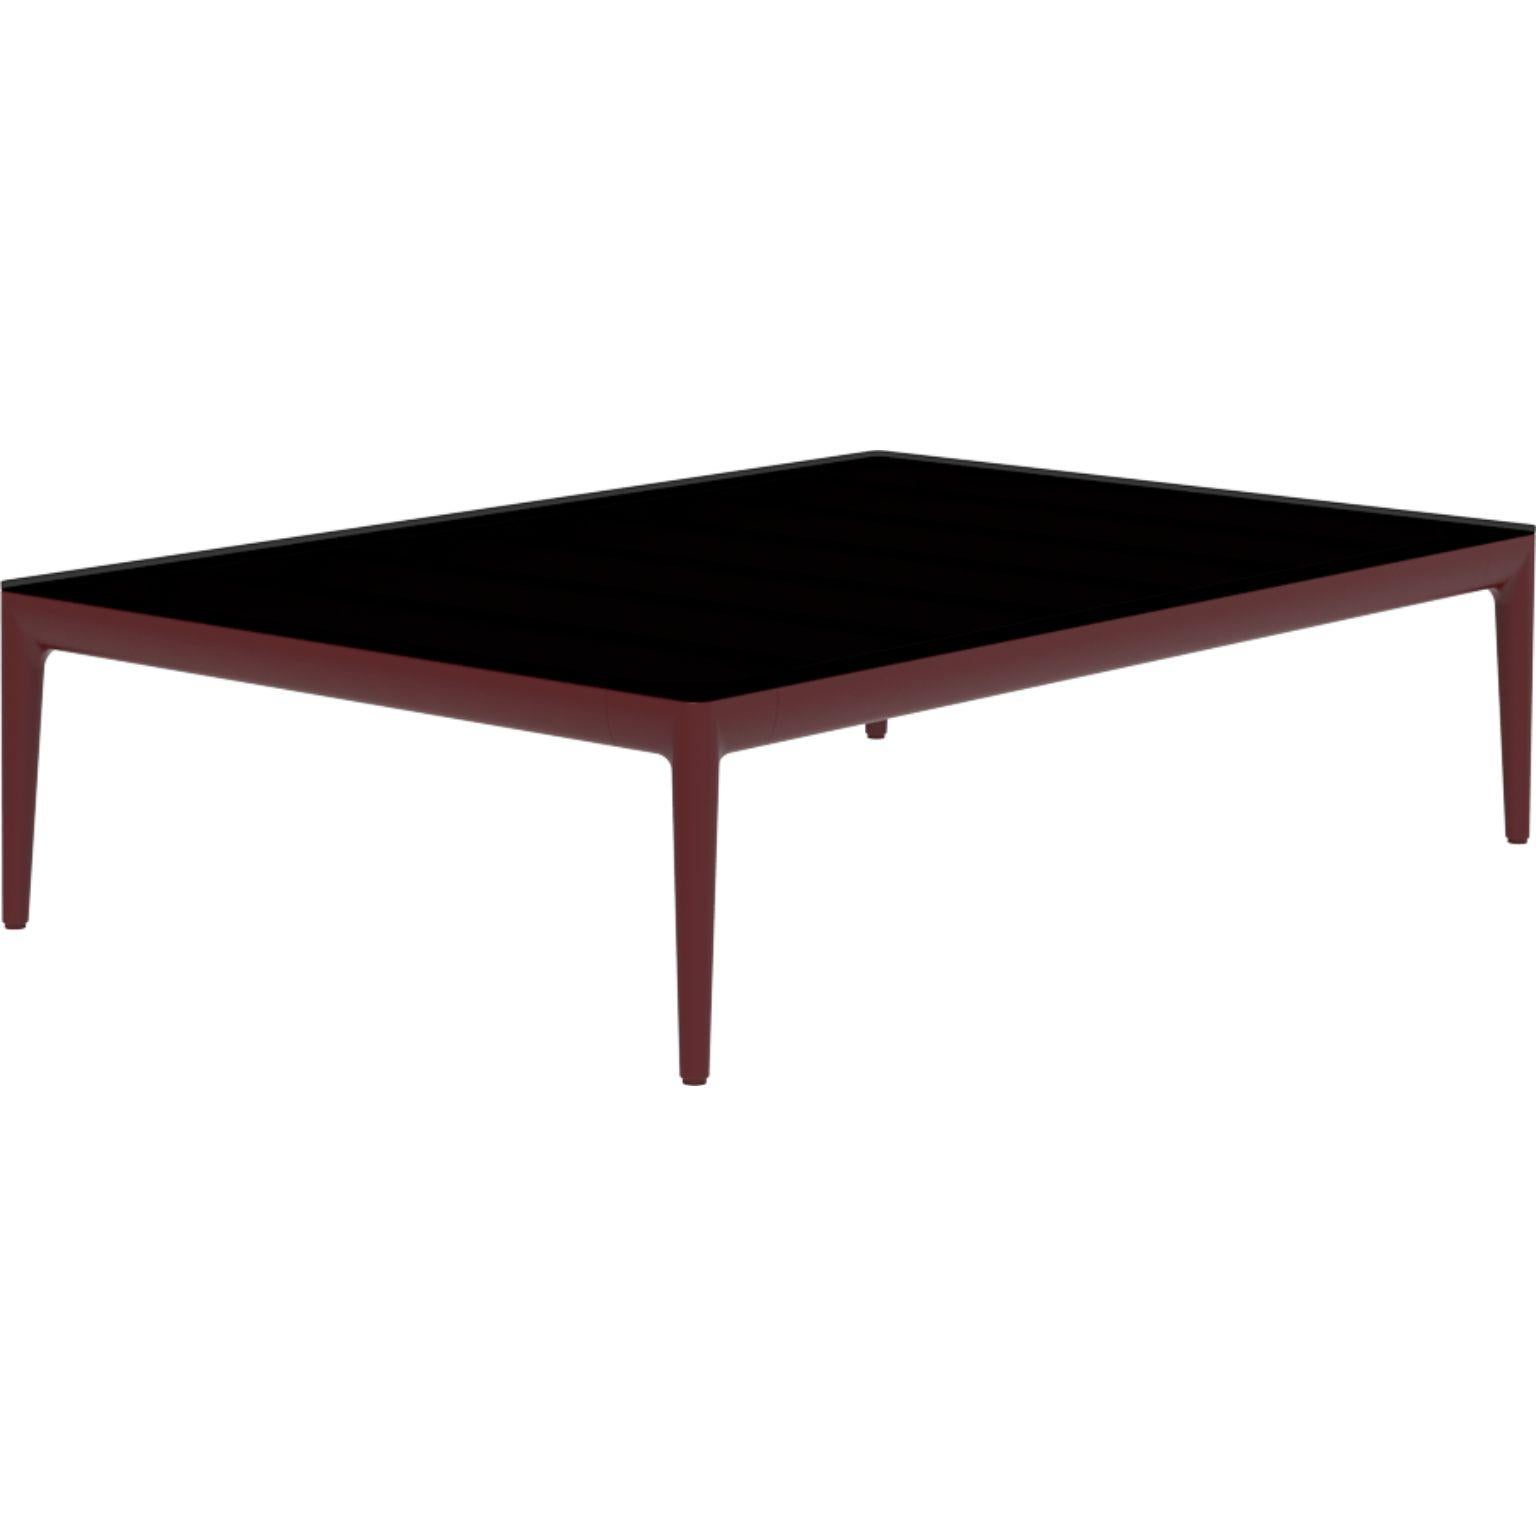 Ribbons Burgundy 115 coffee table by MOWEE
Dimensions: D76 x W115 x H29 cm
Material: Aluminum and HPL top.
Weight: 14.5 kg.
Also available in different colors and finishes. (HPL Black Edge or Neolith top). 

An unmistakable collection for its